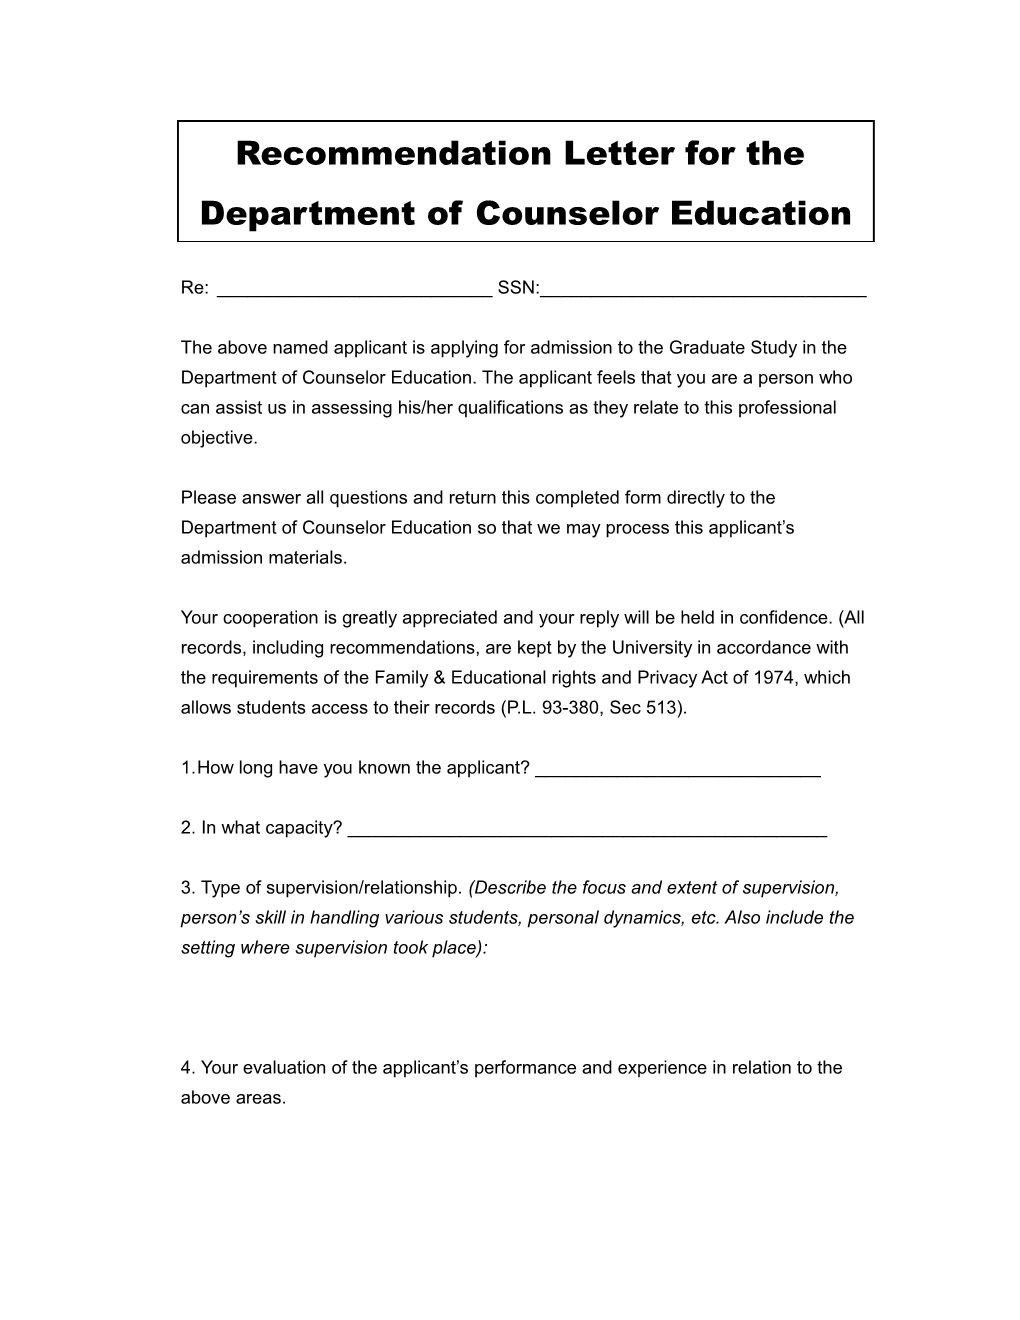 Recommendation Letter for The